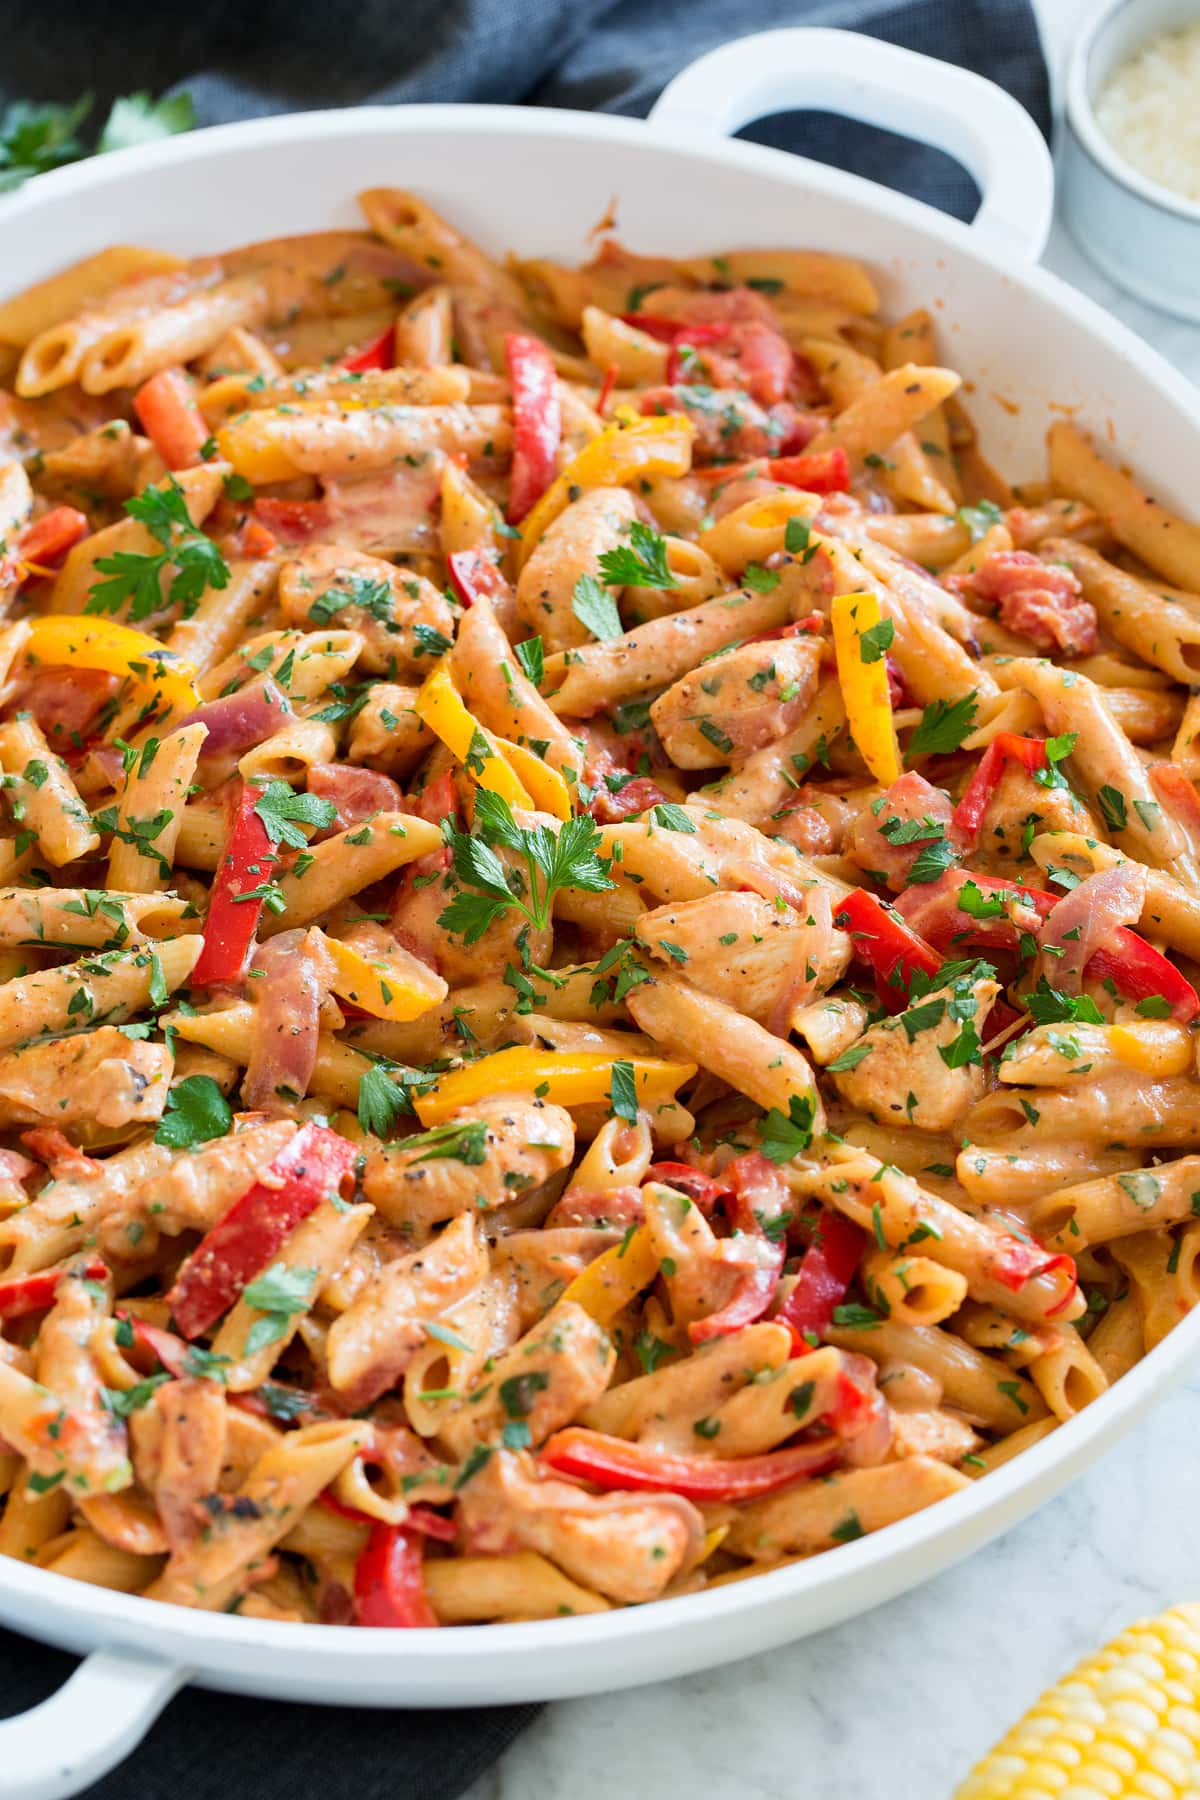 Photo: One pot cajun chicken pasta shown close up in a white pan from the side.